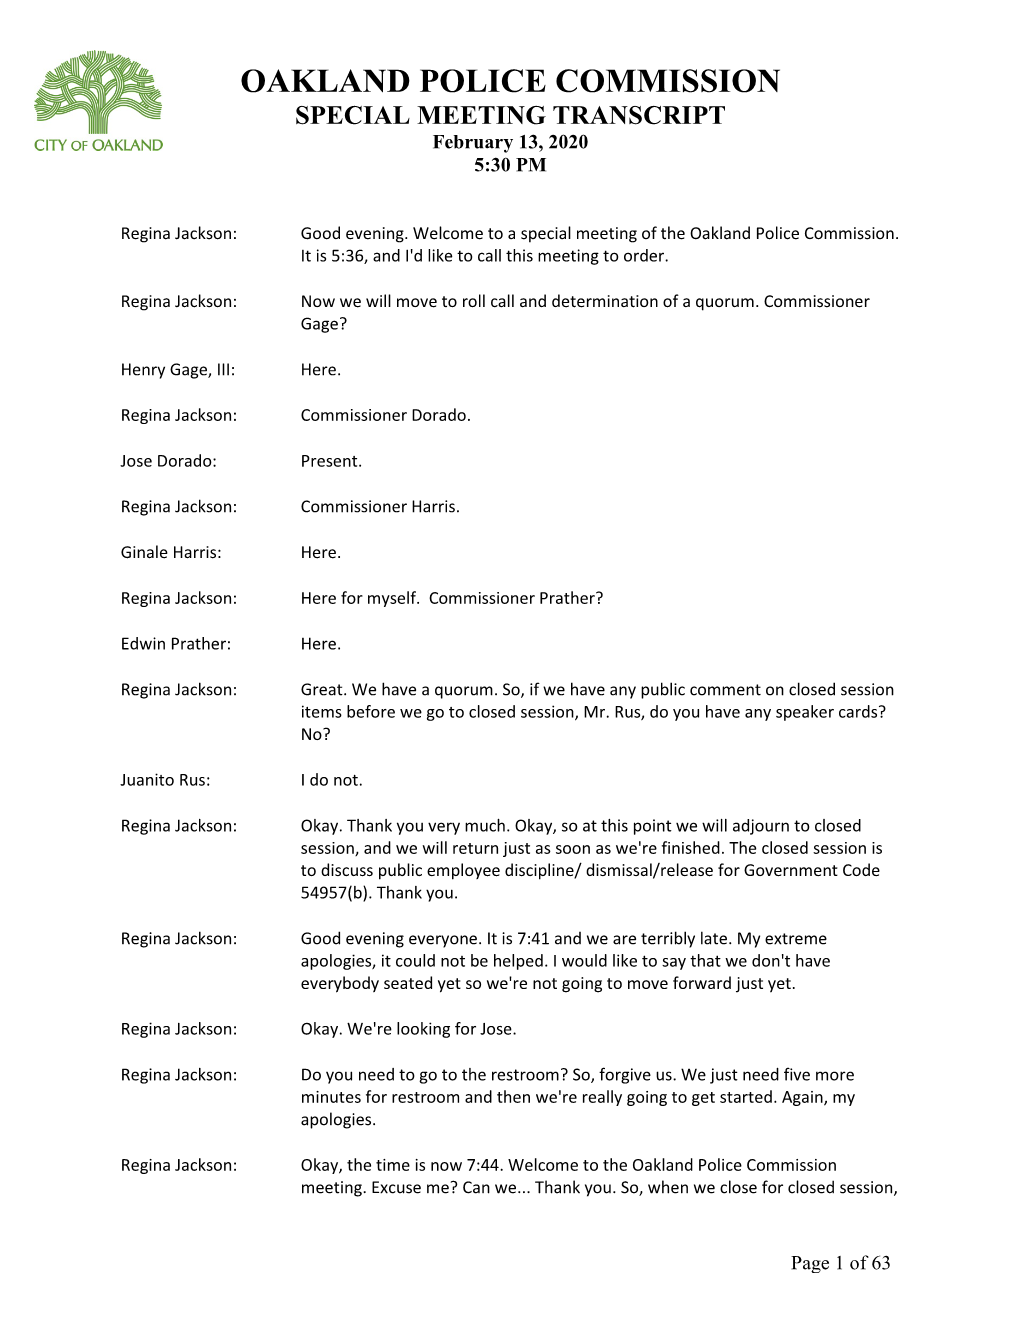 Police Commission 2.13.20 Meeting Transcript